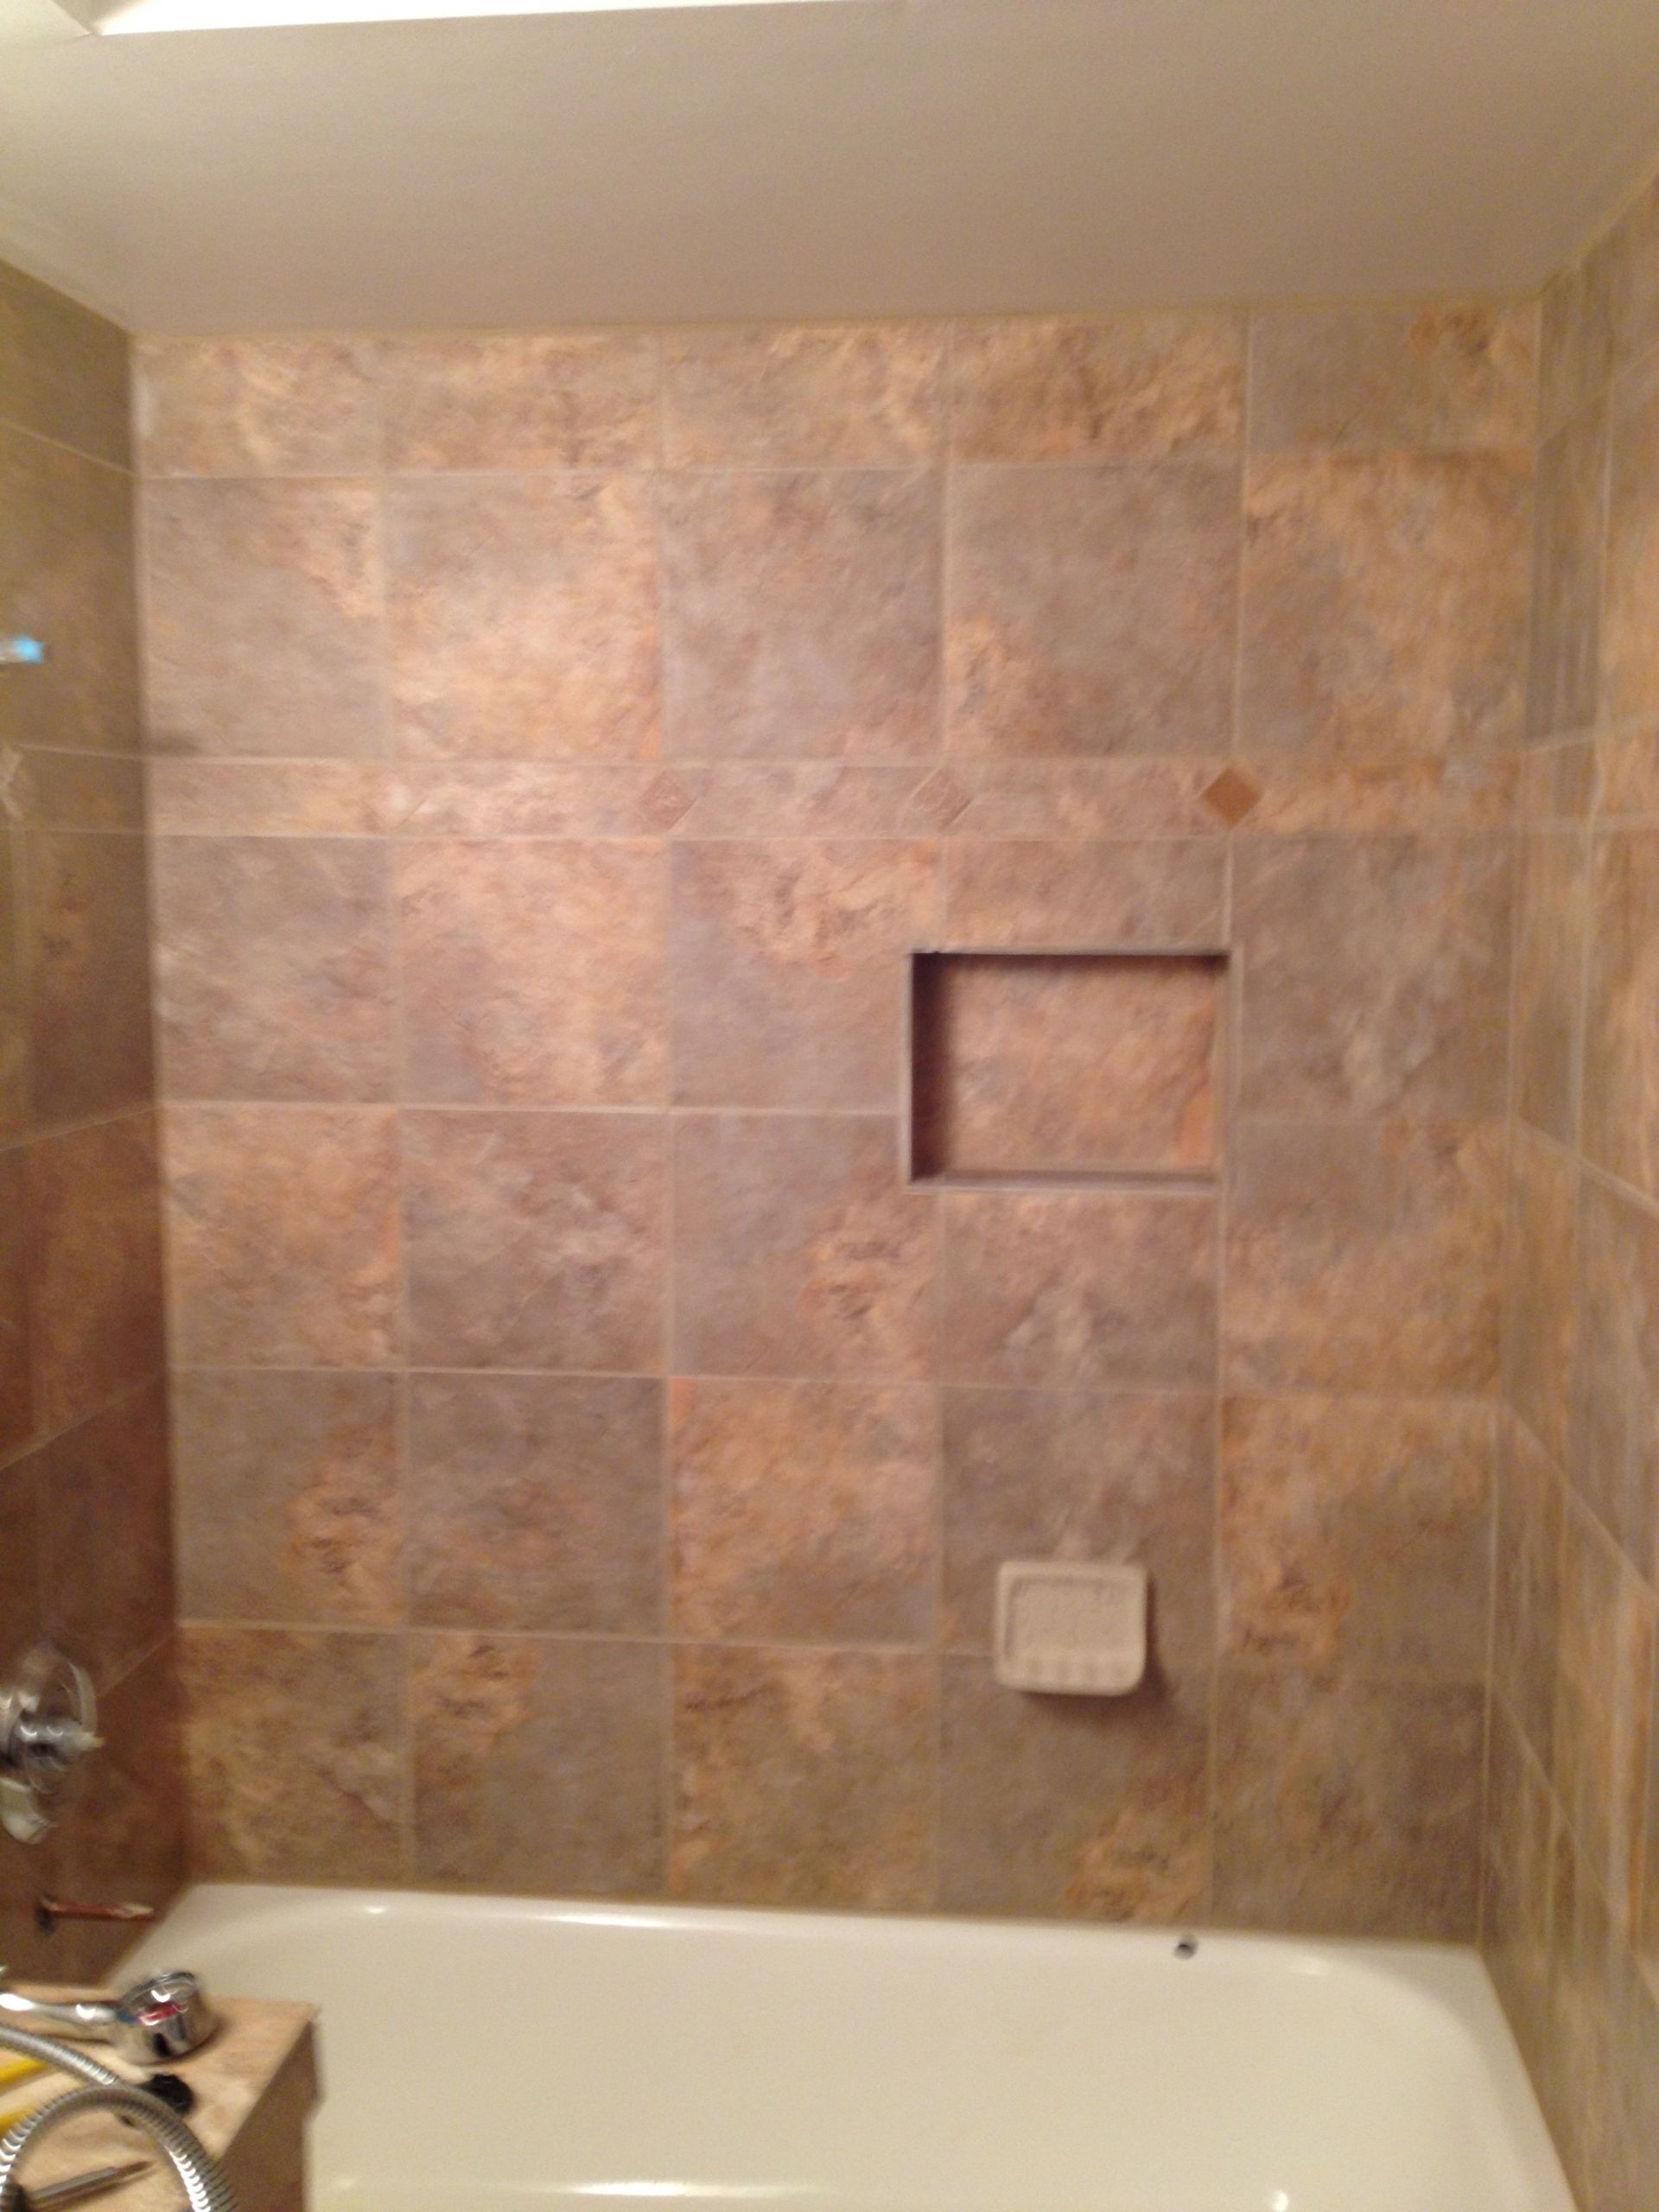 Lowes Bathroom Tiles
 Bathroom Give Your Shower Some Character With New Lowes